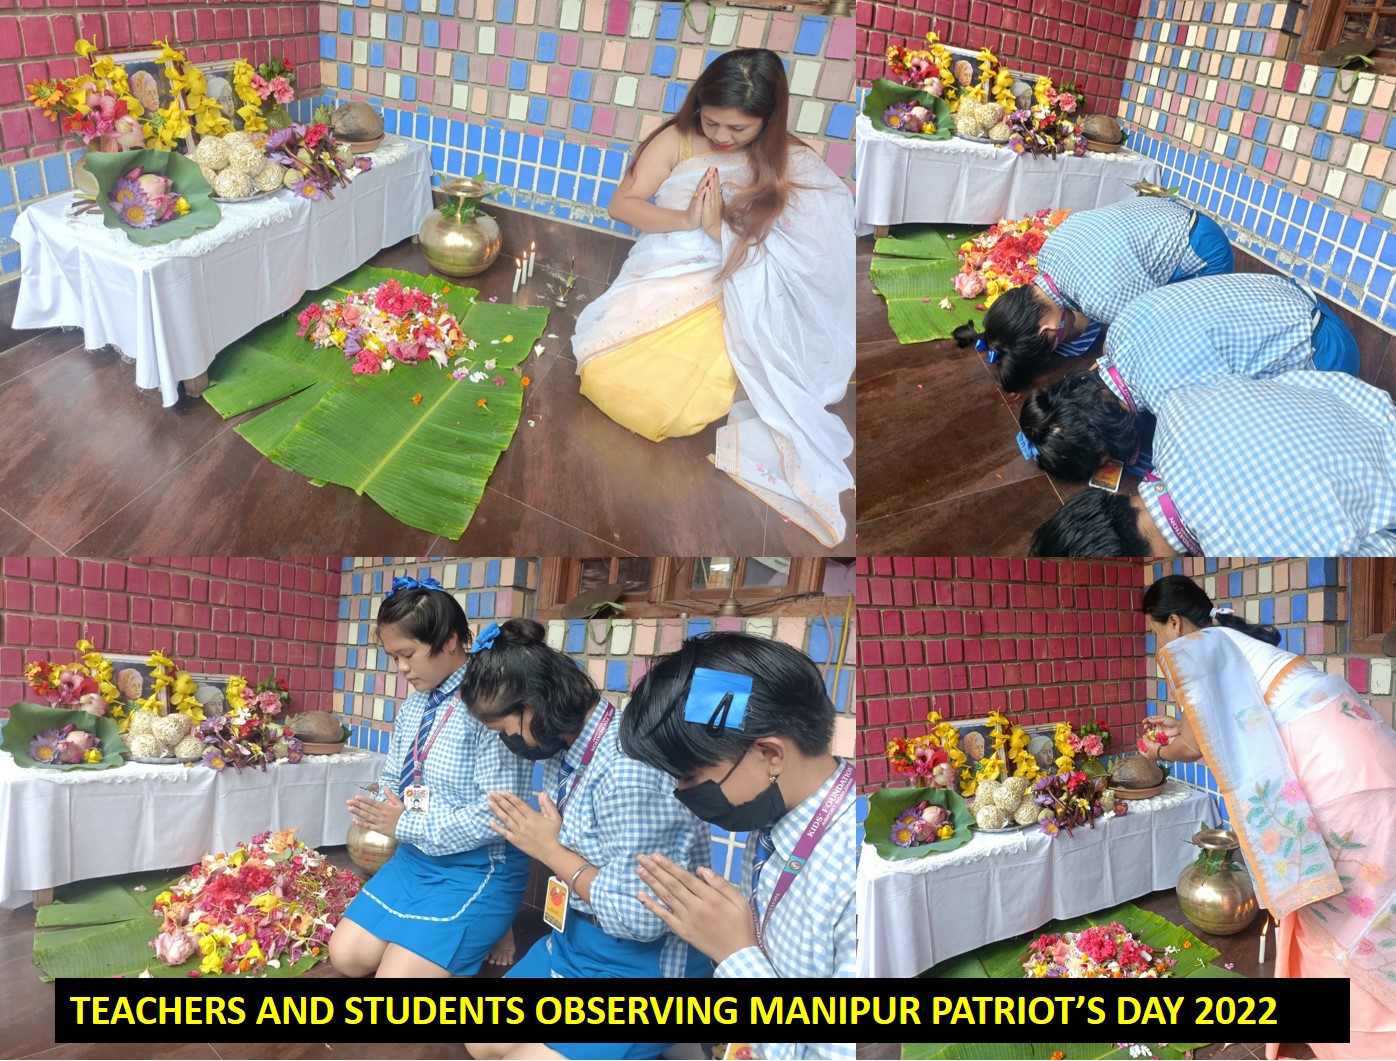 OBSERVING MANIPUR PATRIOT’S DAY 2022 2